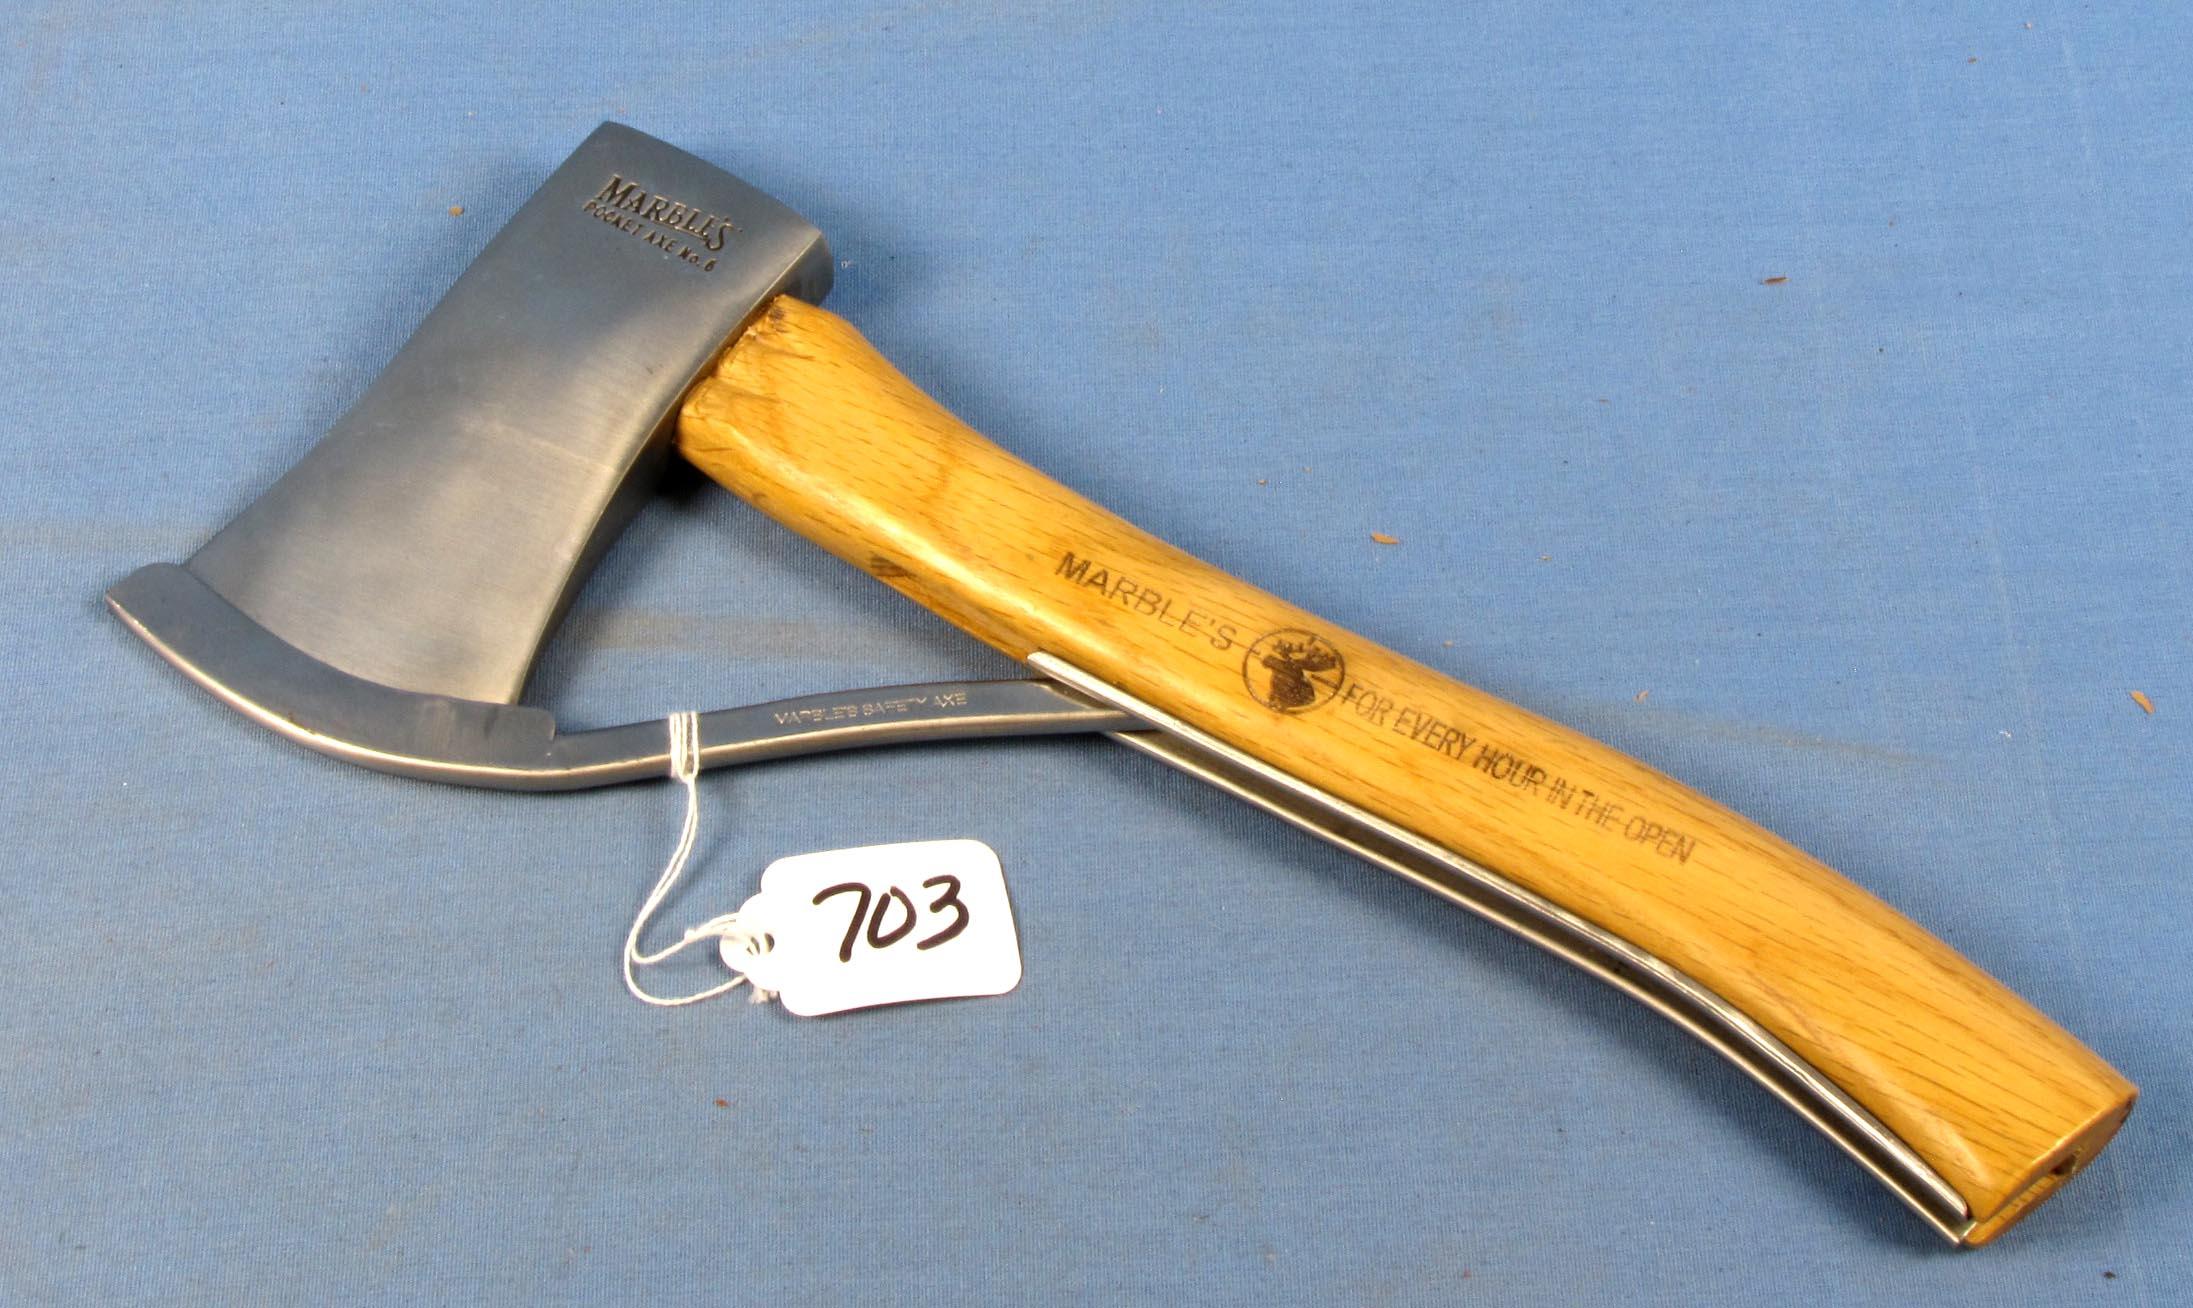 Marbles Pocket Axe No. 6 (safety Axe) Hndl: Marble's For Every Hour In The Open